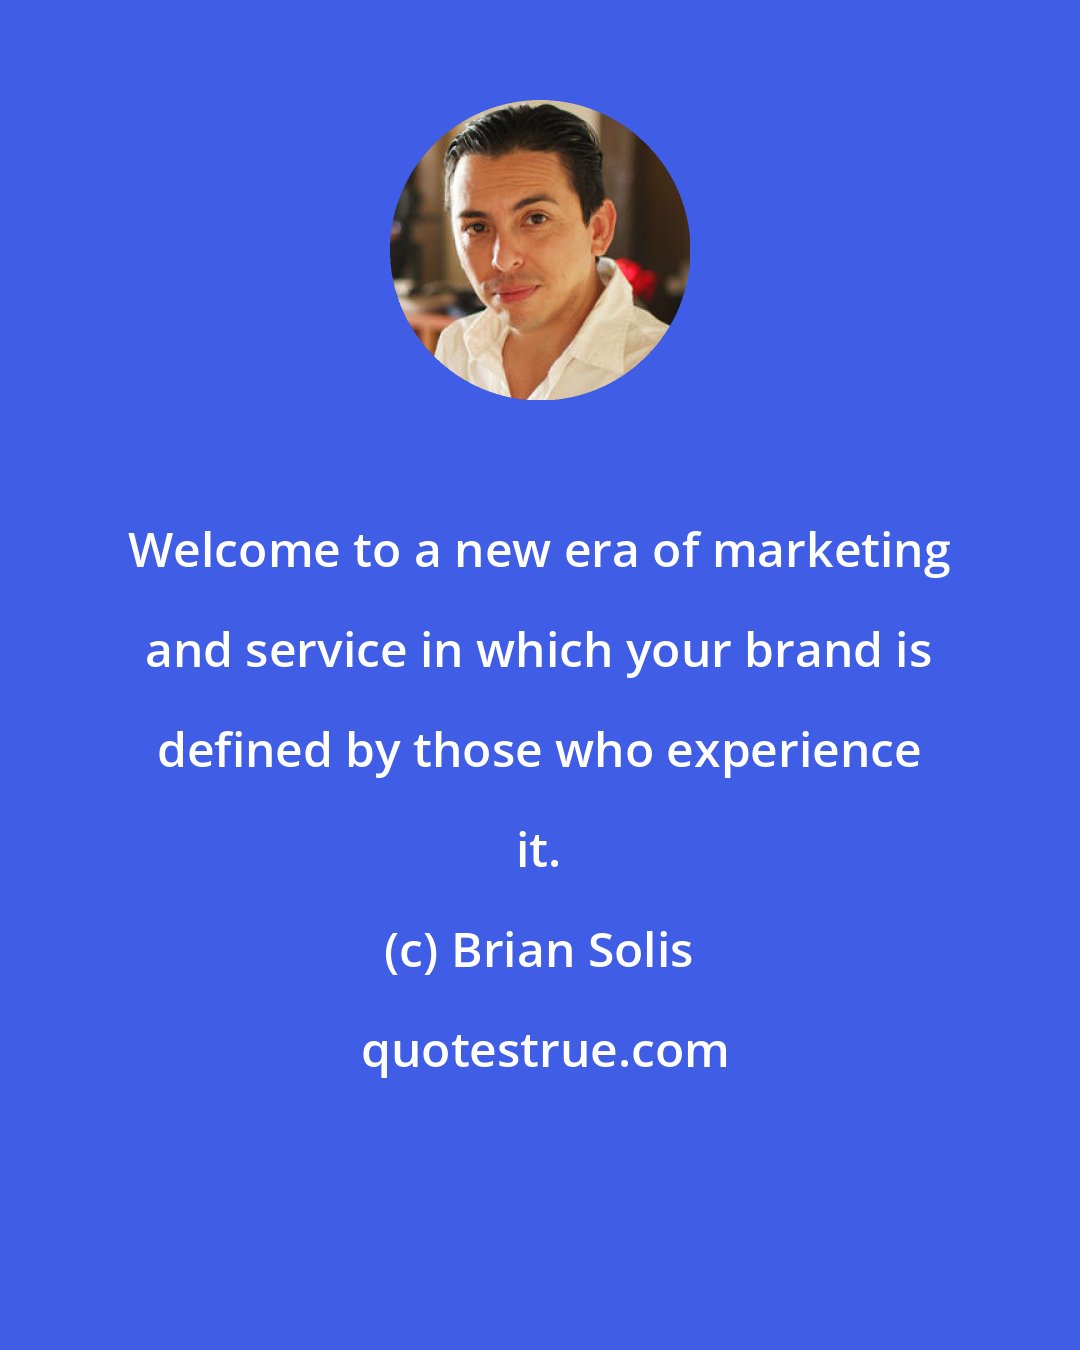 Brian Solis: Welcome to a new era of marketing and service in which your brand is defined by those who experience it.